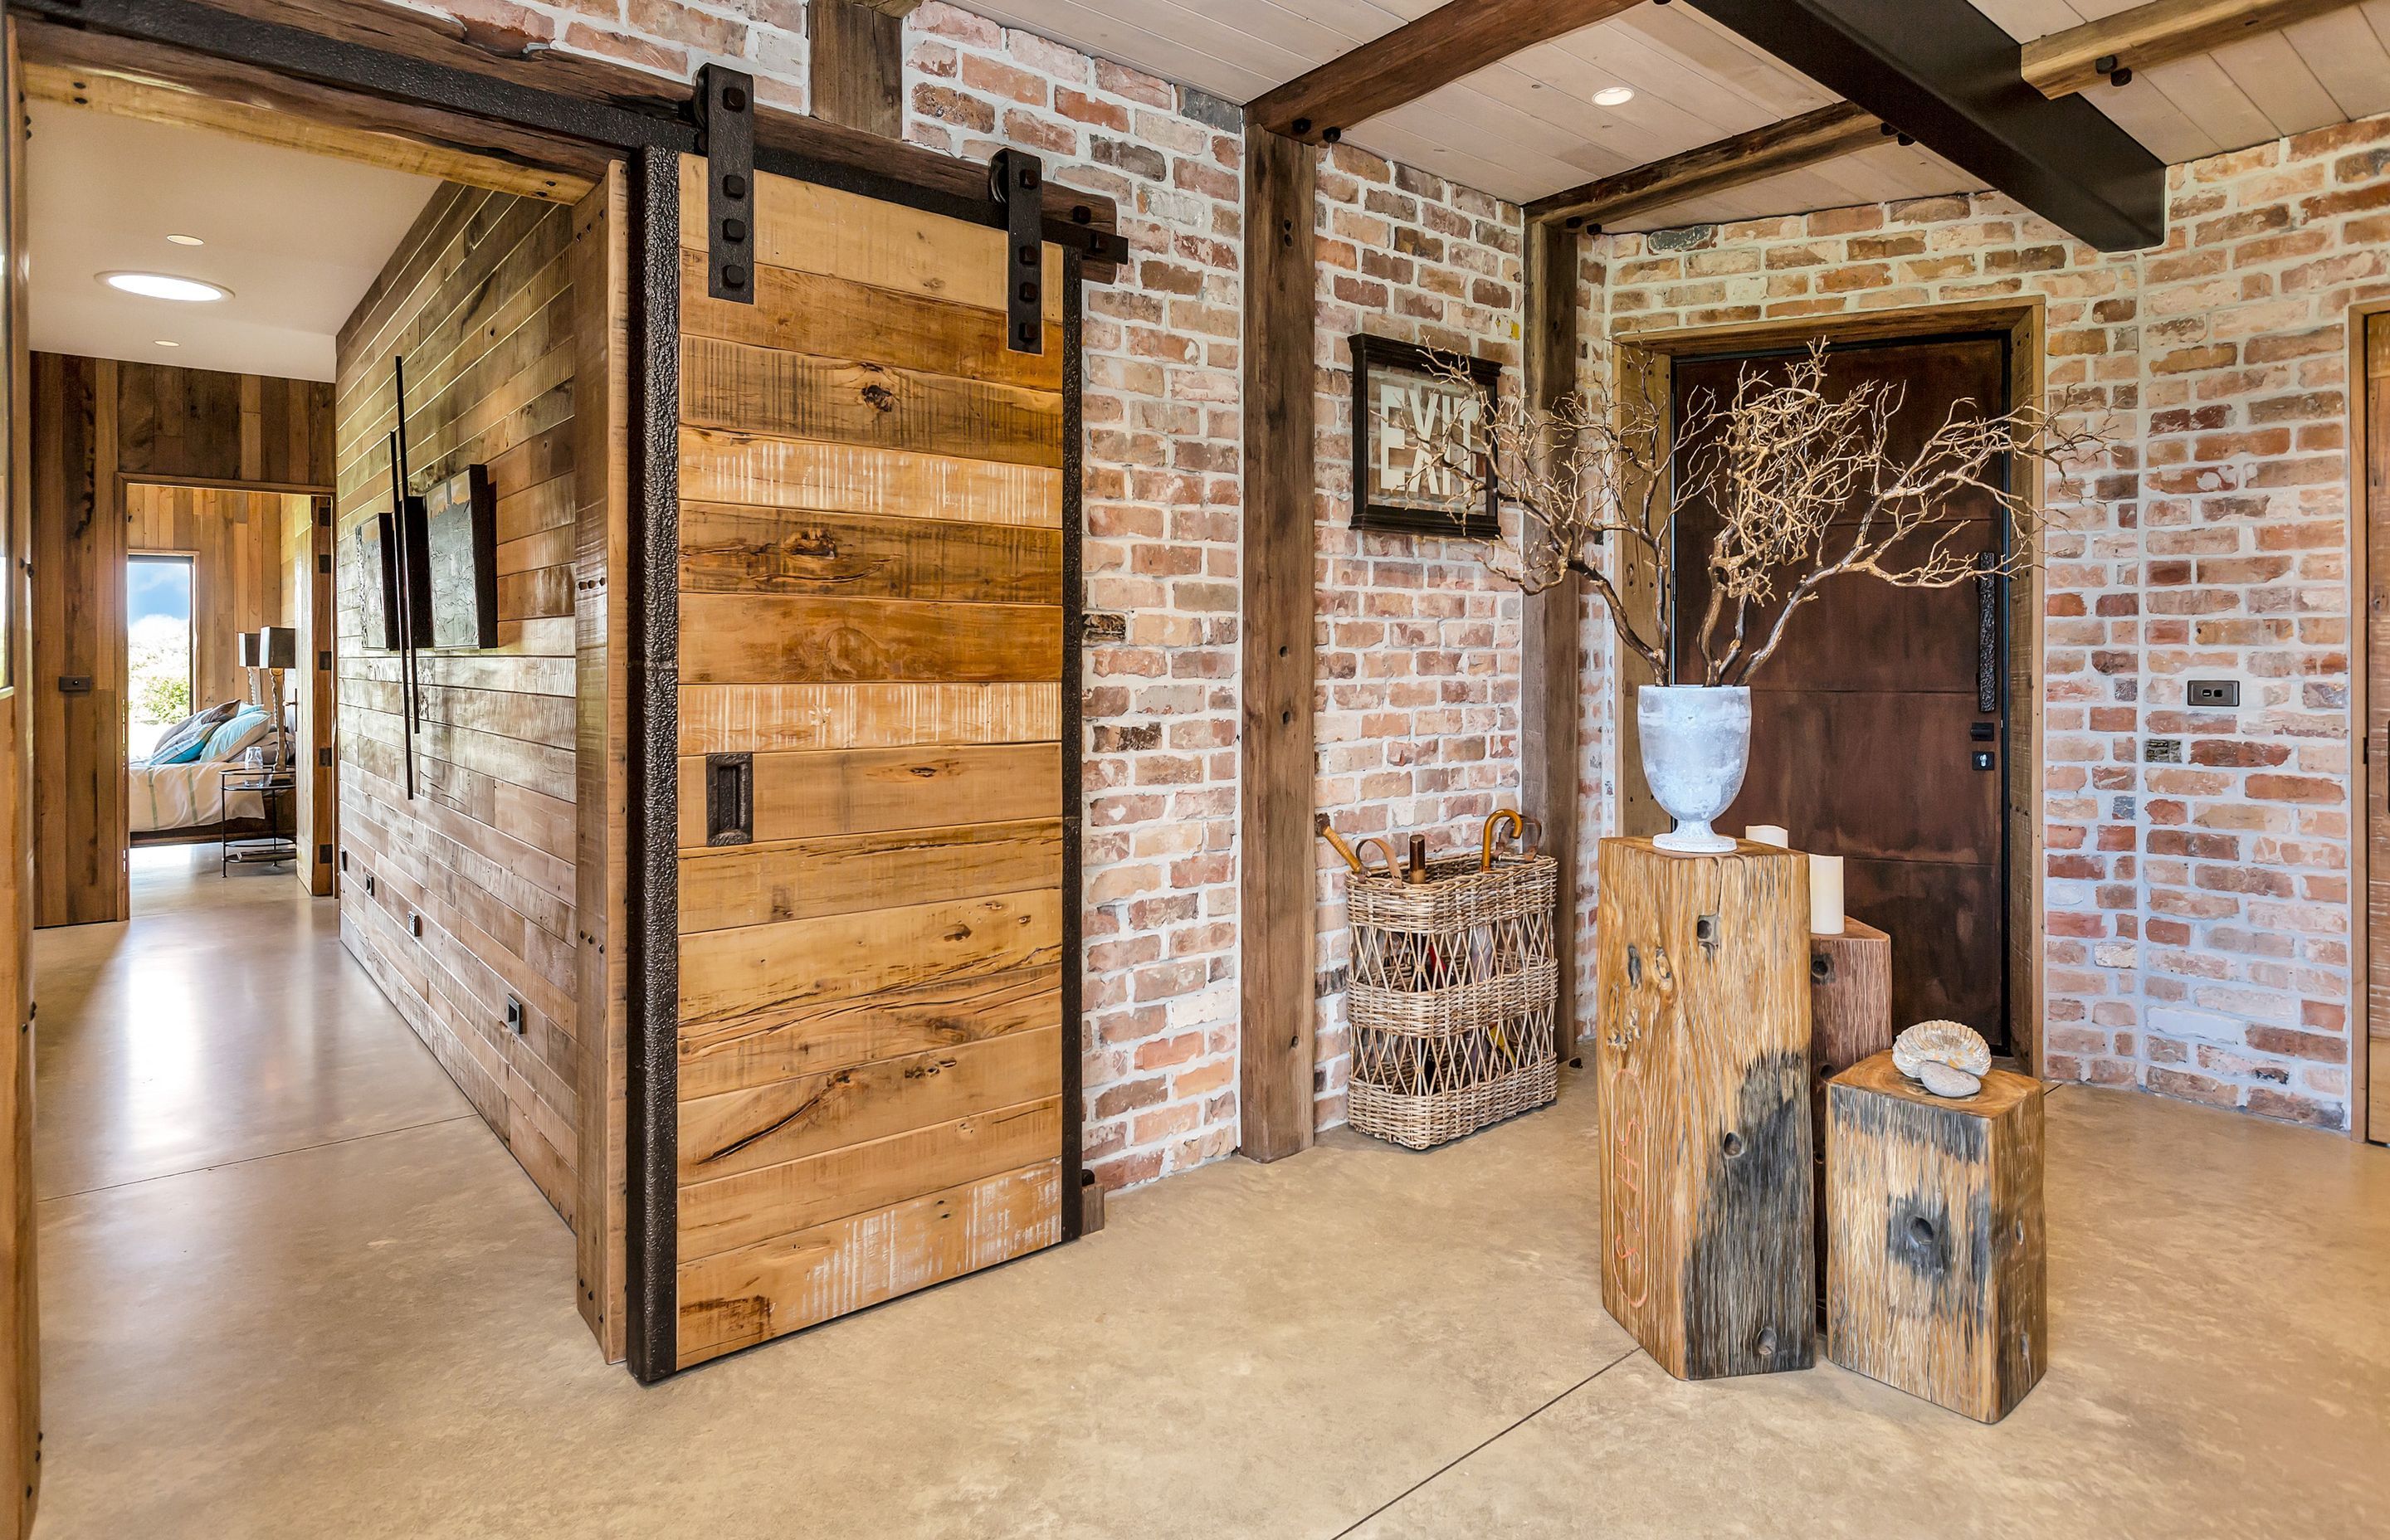 The entrance way features a handmade rimu-and-steel sliding barn door and recyled bricks from 'Real Groovy Records' building in Auckland and the Albion Hotel in Gisborne.